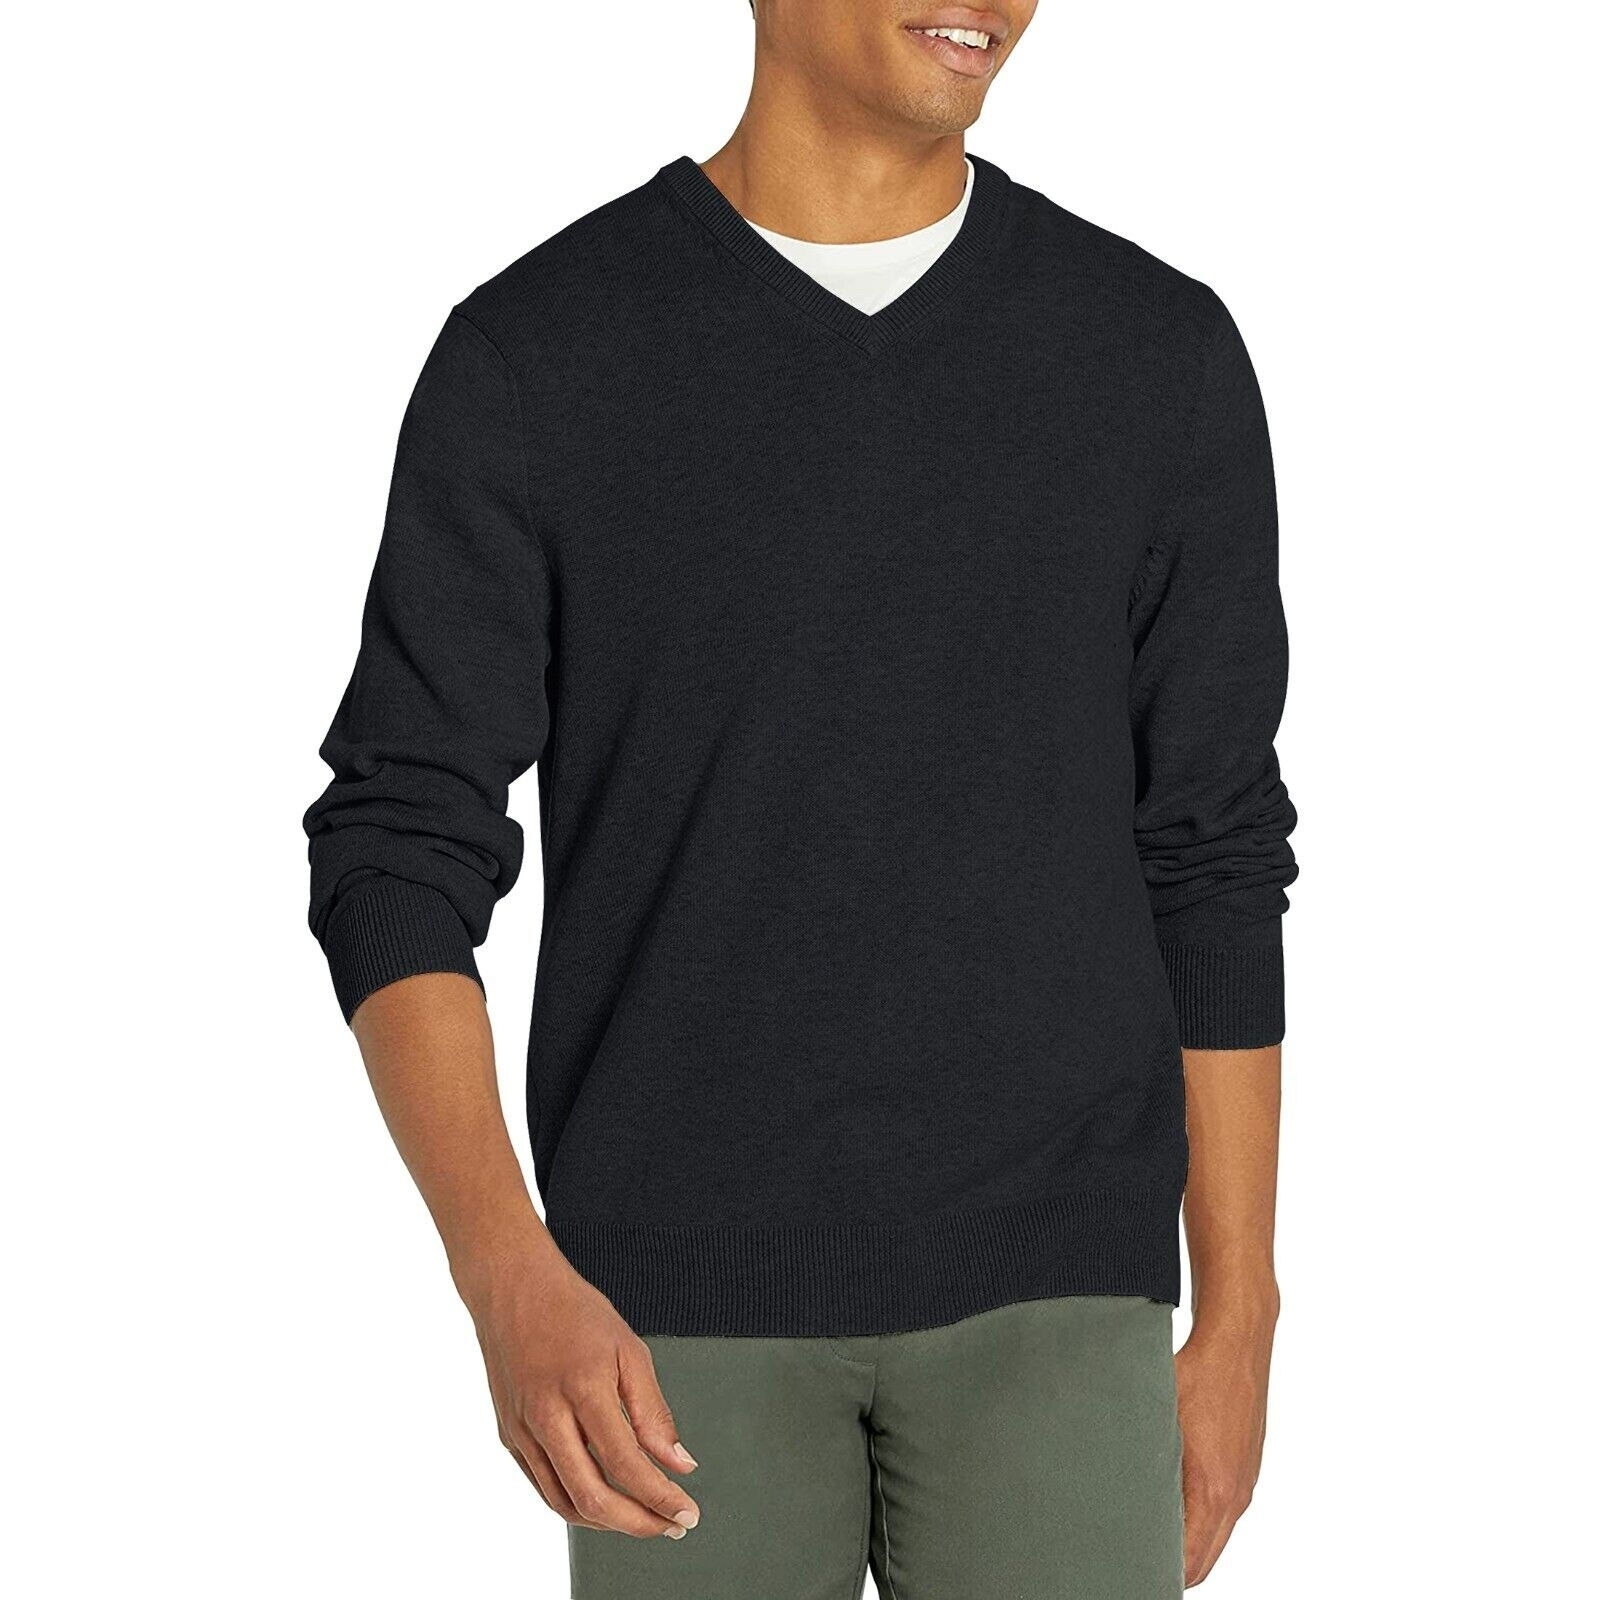 Men's Casual Ultra-Soft Slim Fit Warm Knit Pullover V-Neck Sweater For Winter - Grey, XX-Large